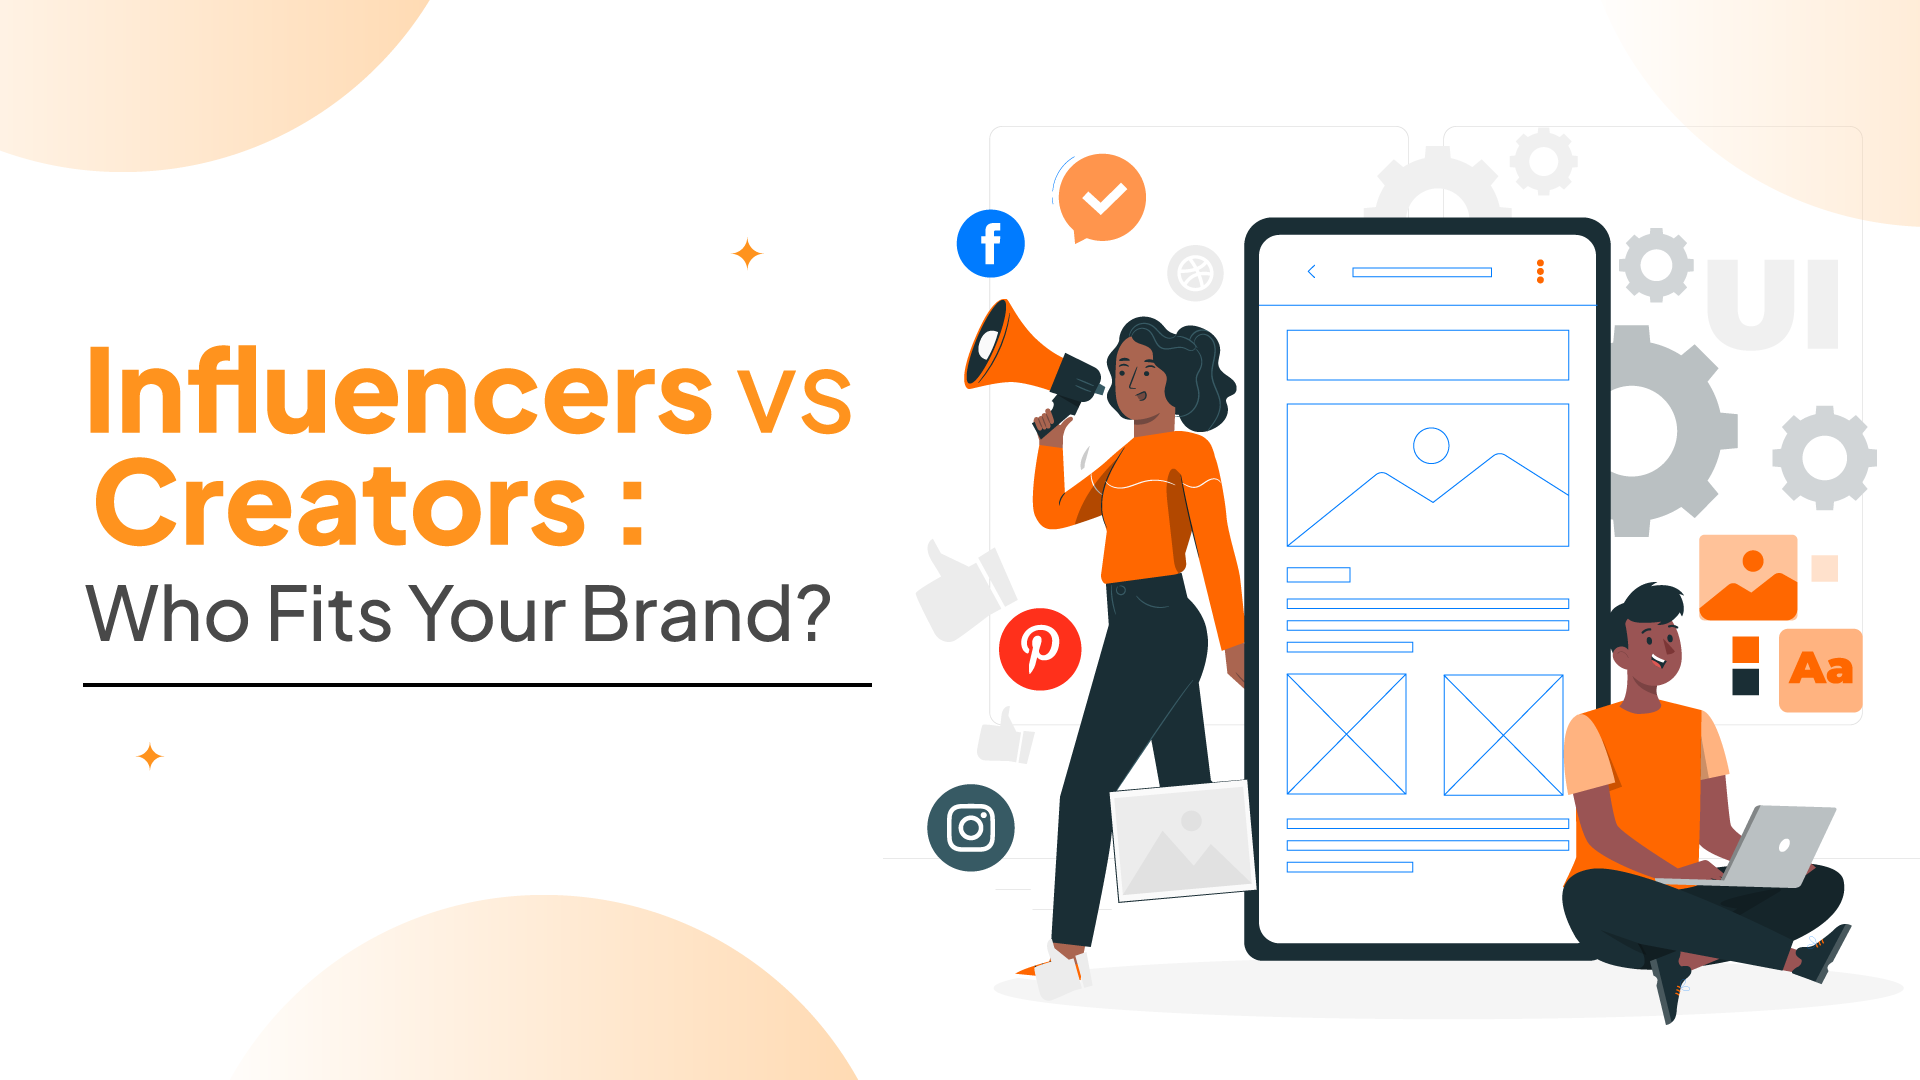 Influencers vs. Creators: Who Fits Your Brand? 